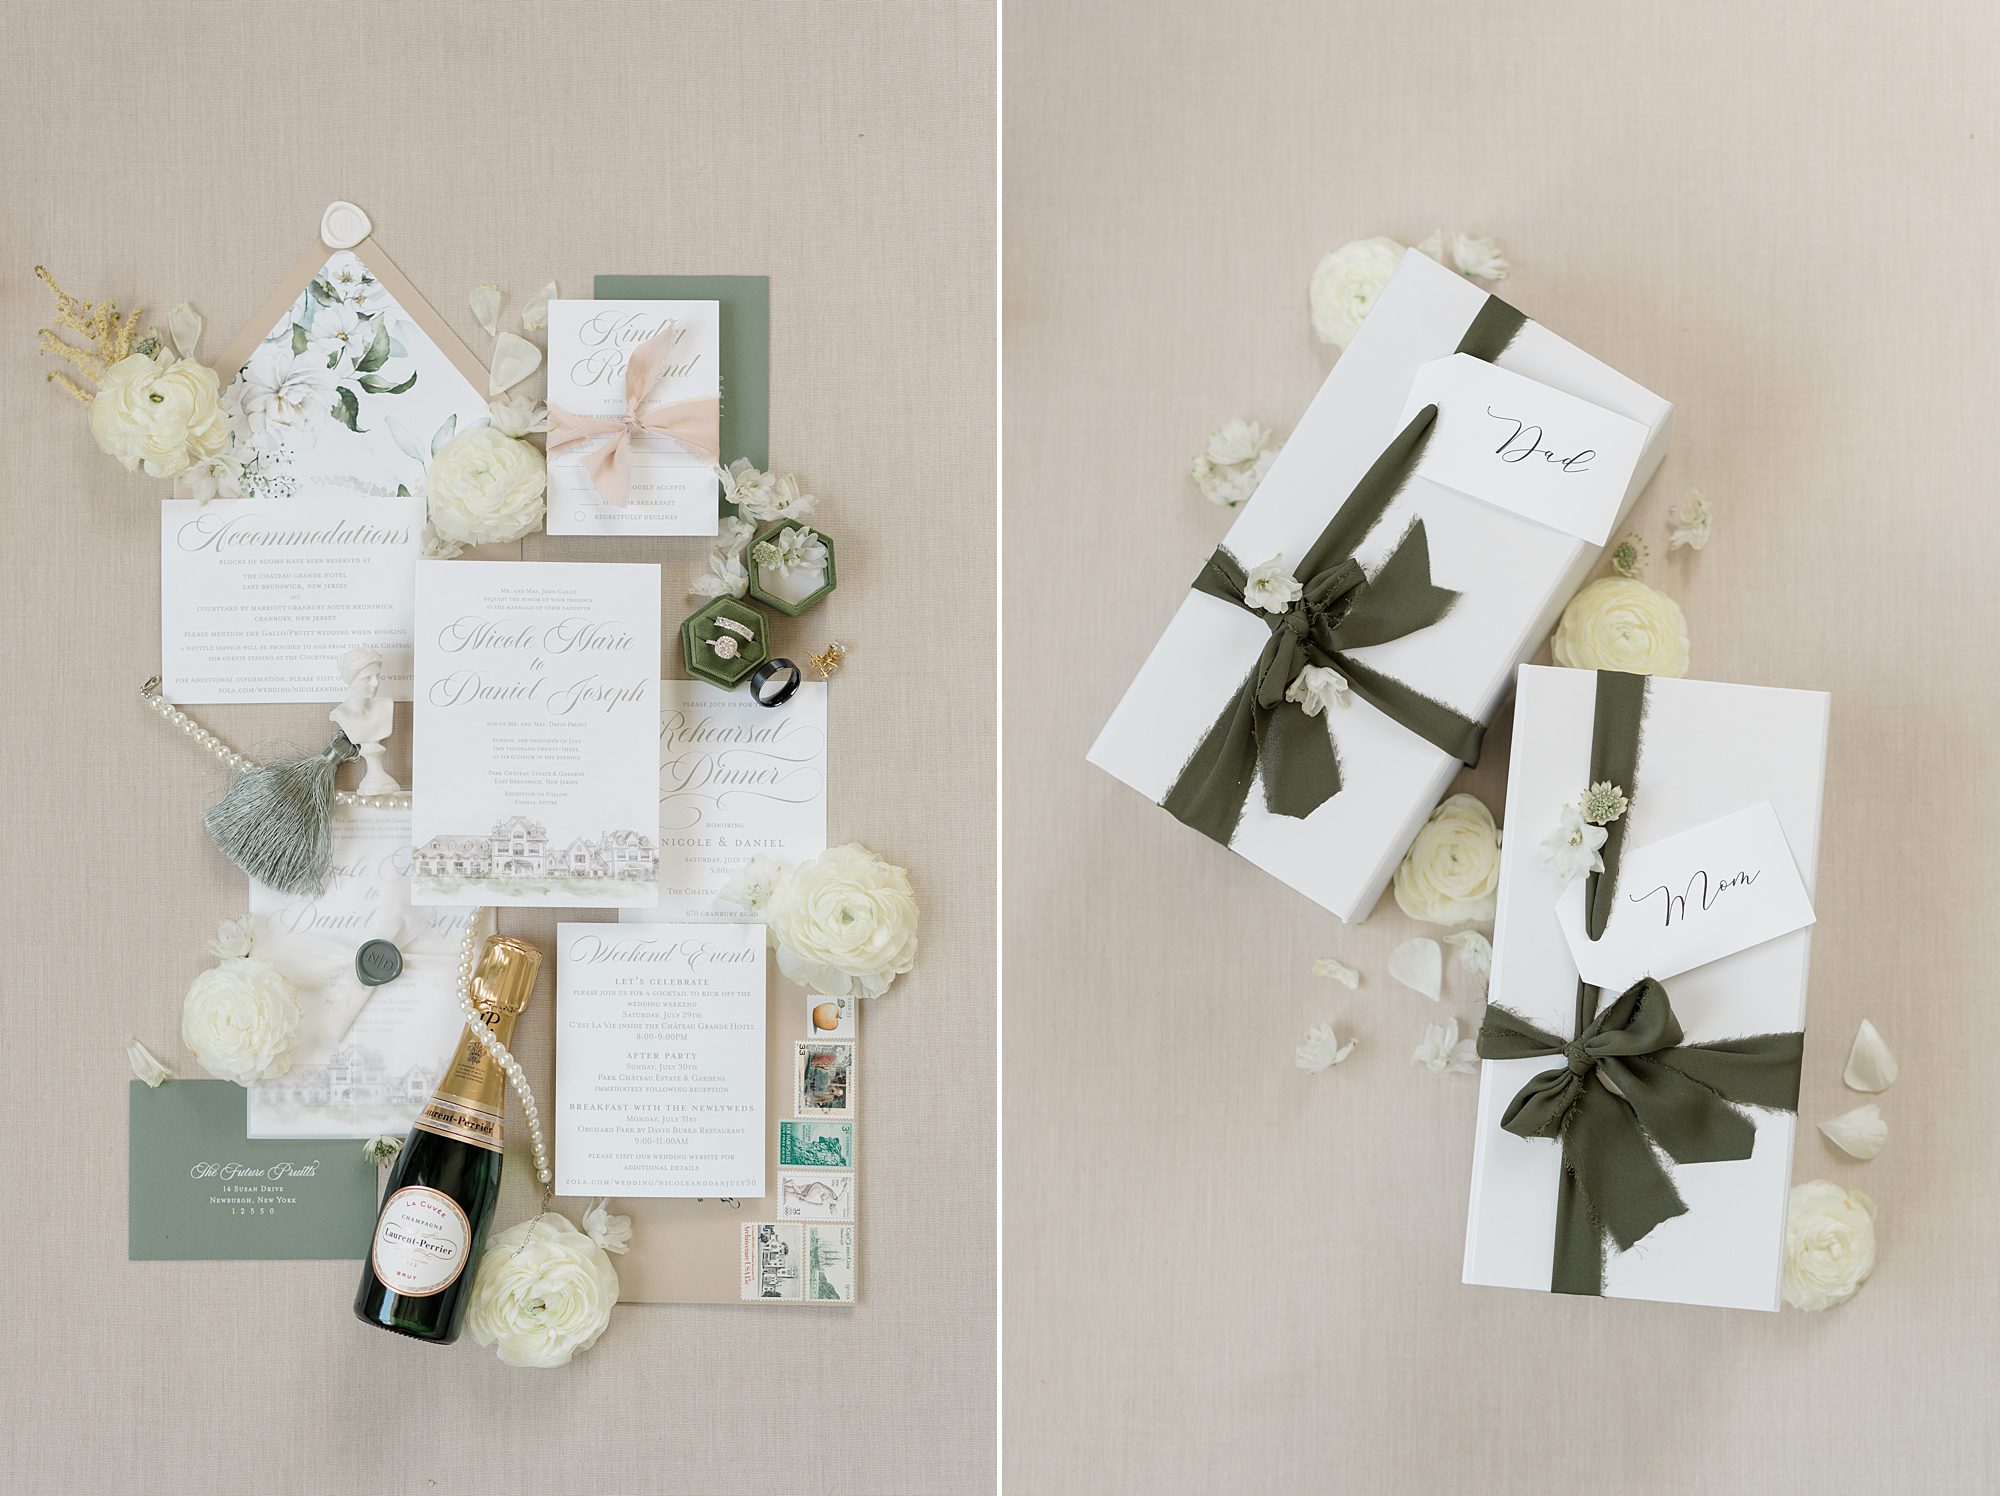 wedding invitations and details from Dreamy Park Chateau Wedding 